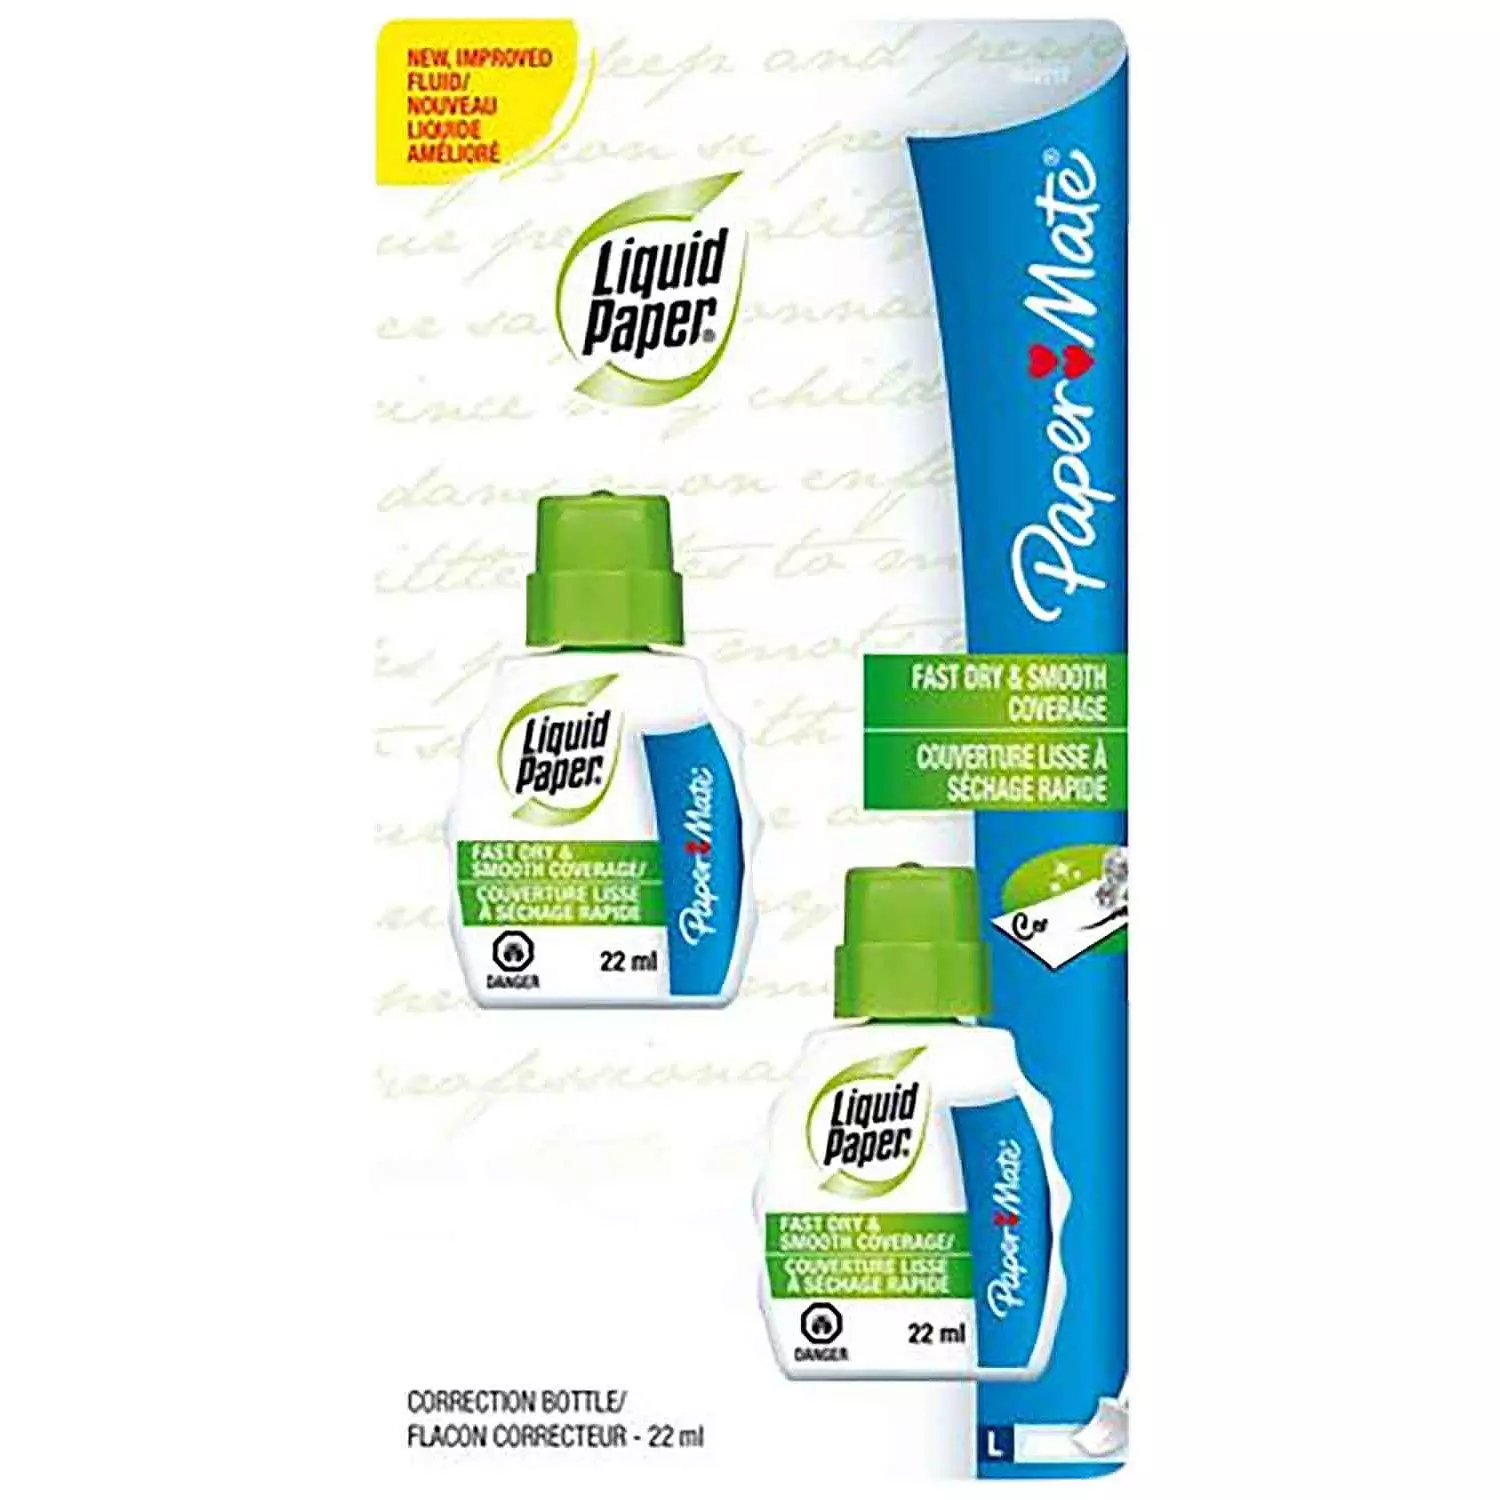 Paper Mate - Liquid Paper fast dry correction fluid, pk. of 2